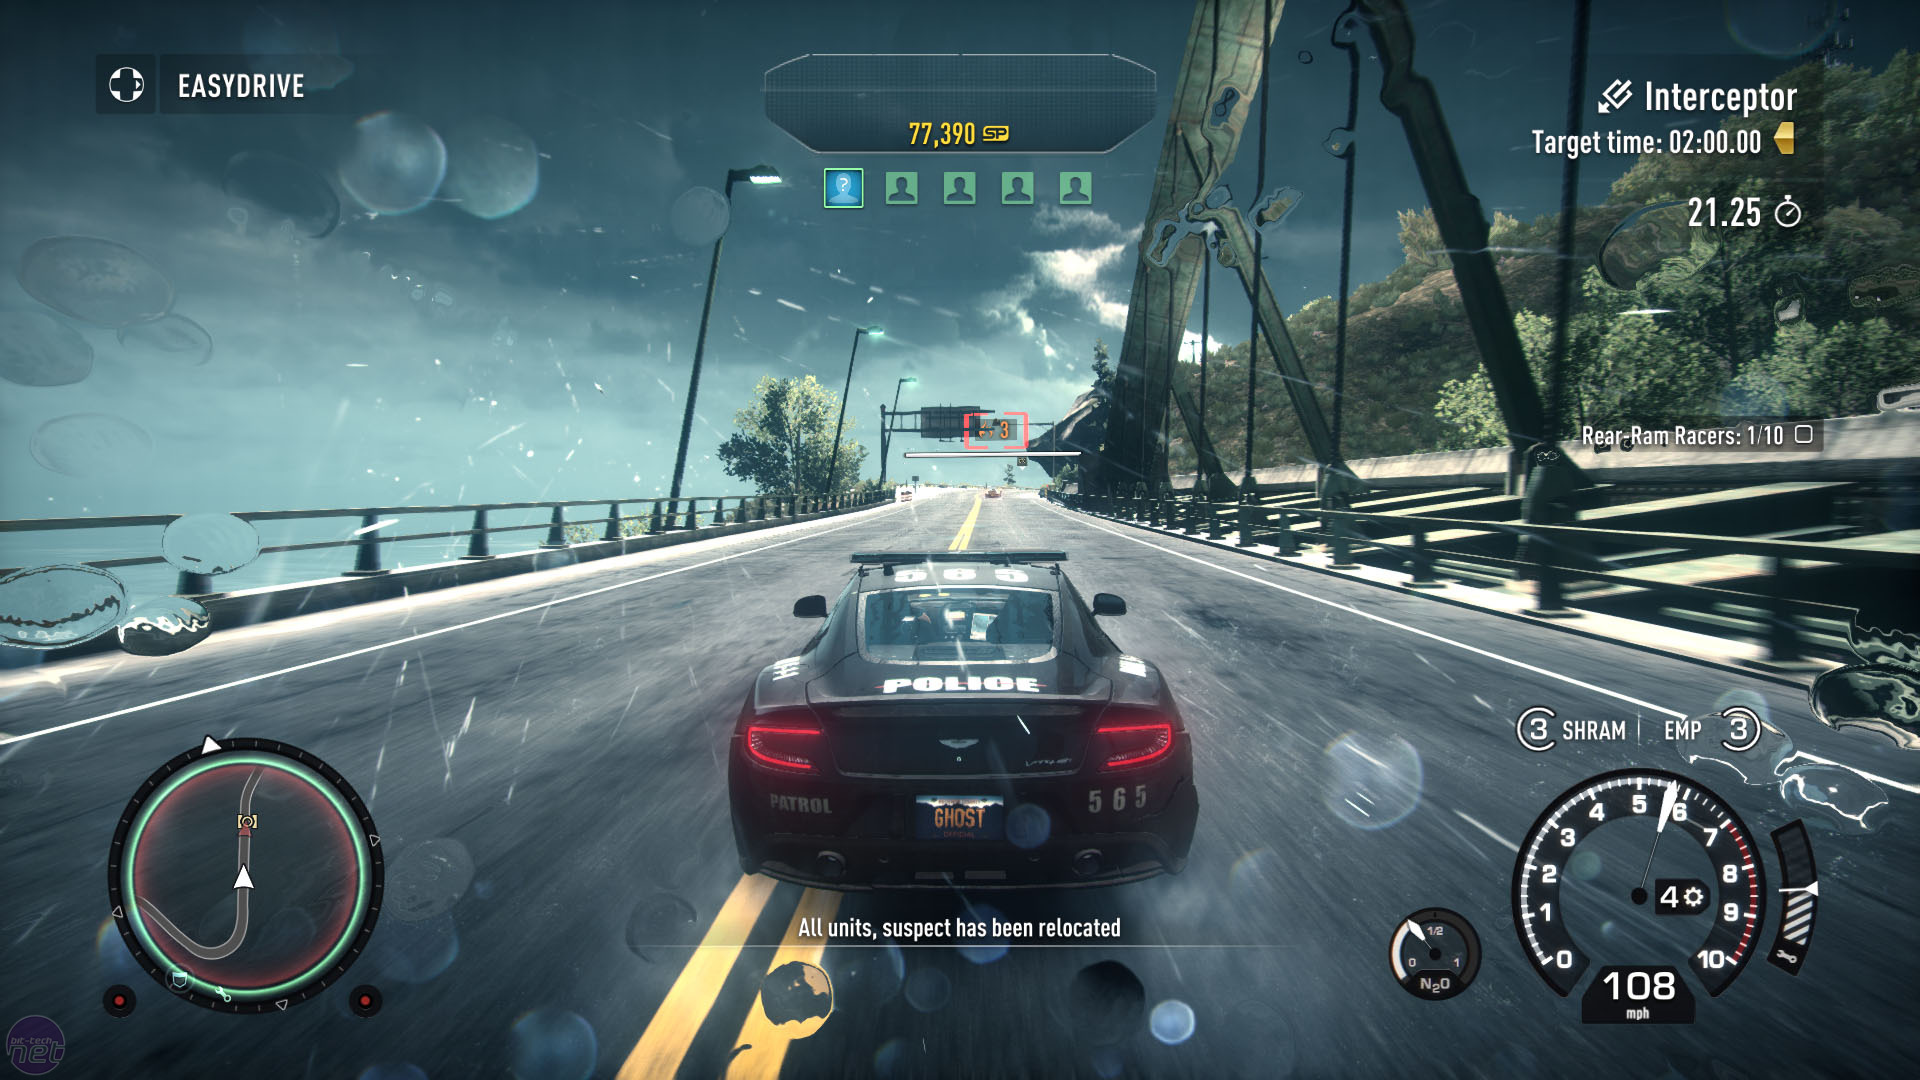 Секунд пк. Игра NFS Rivals. Need for Speed: Rivals. Deluxe Edition [Rus] (2013). NFS 2013. Гонки нфс все части.